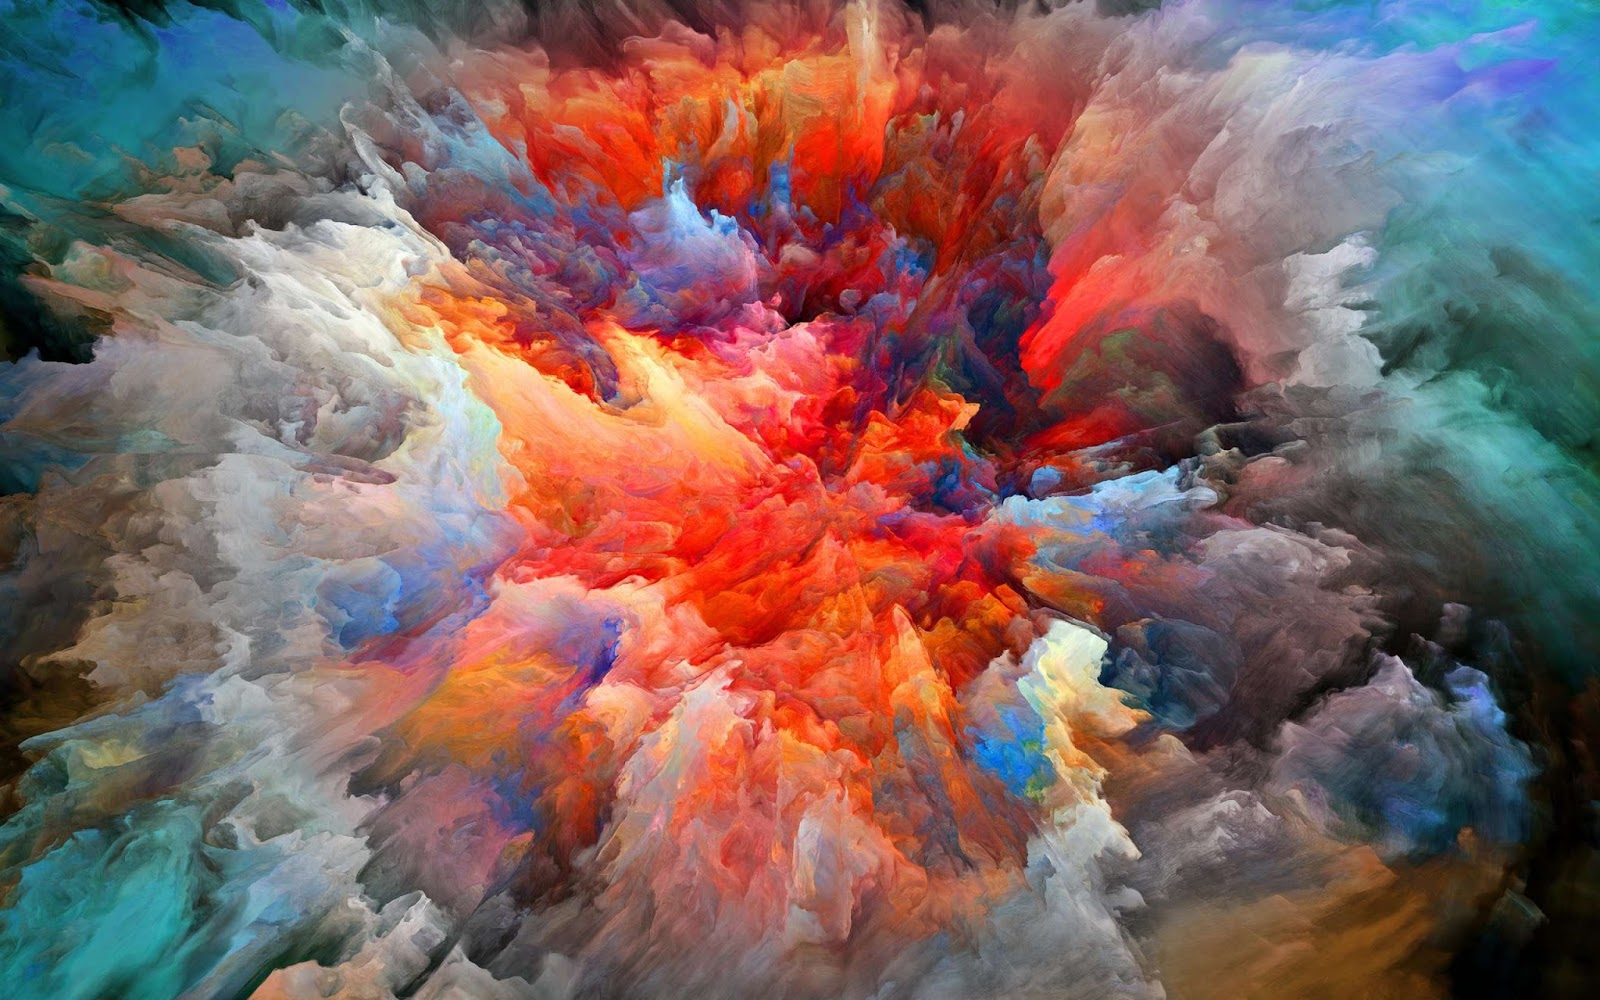 Explosion of color 2560 x 1600